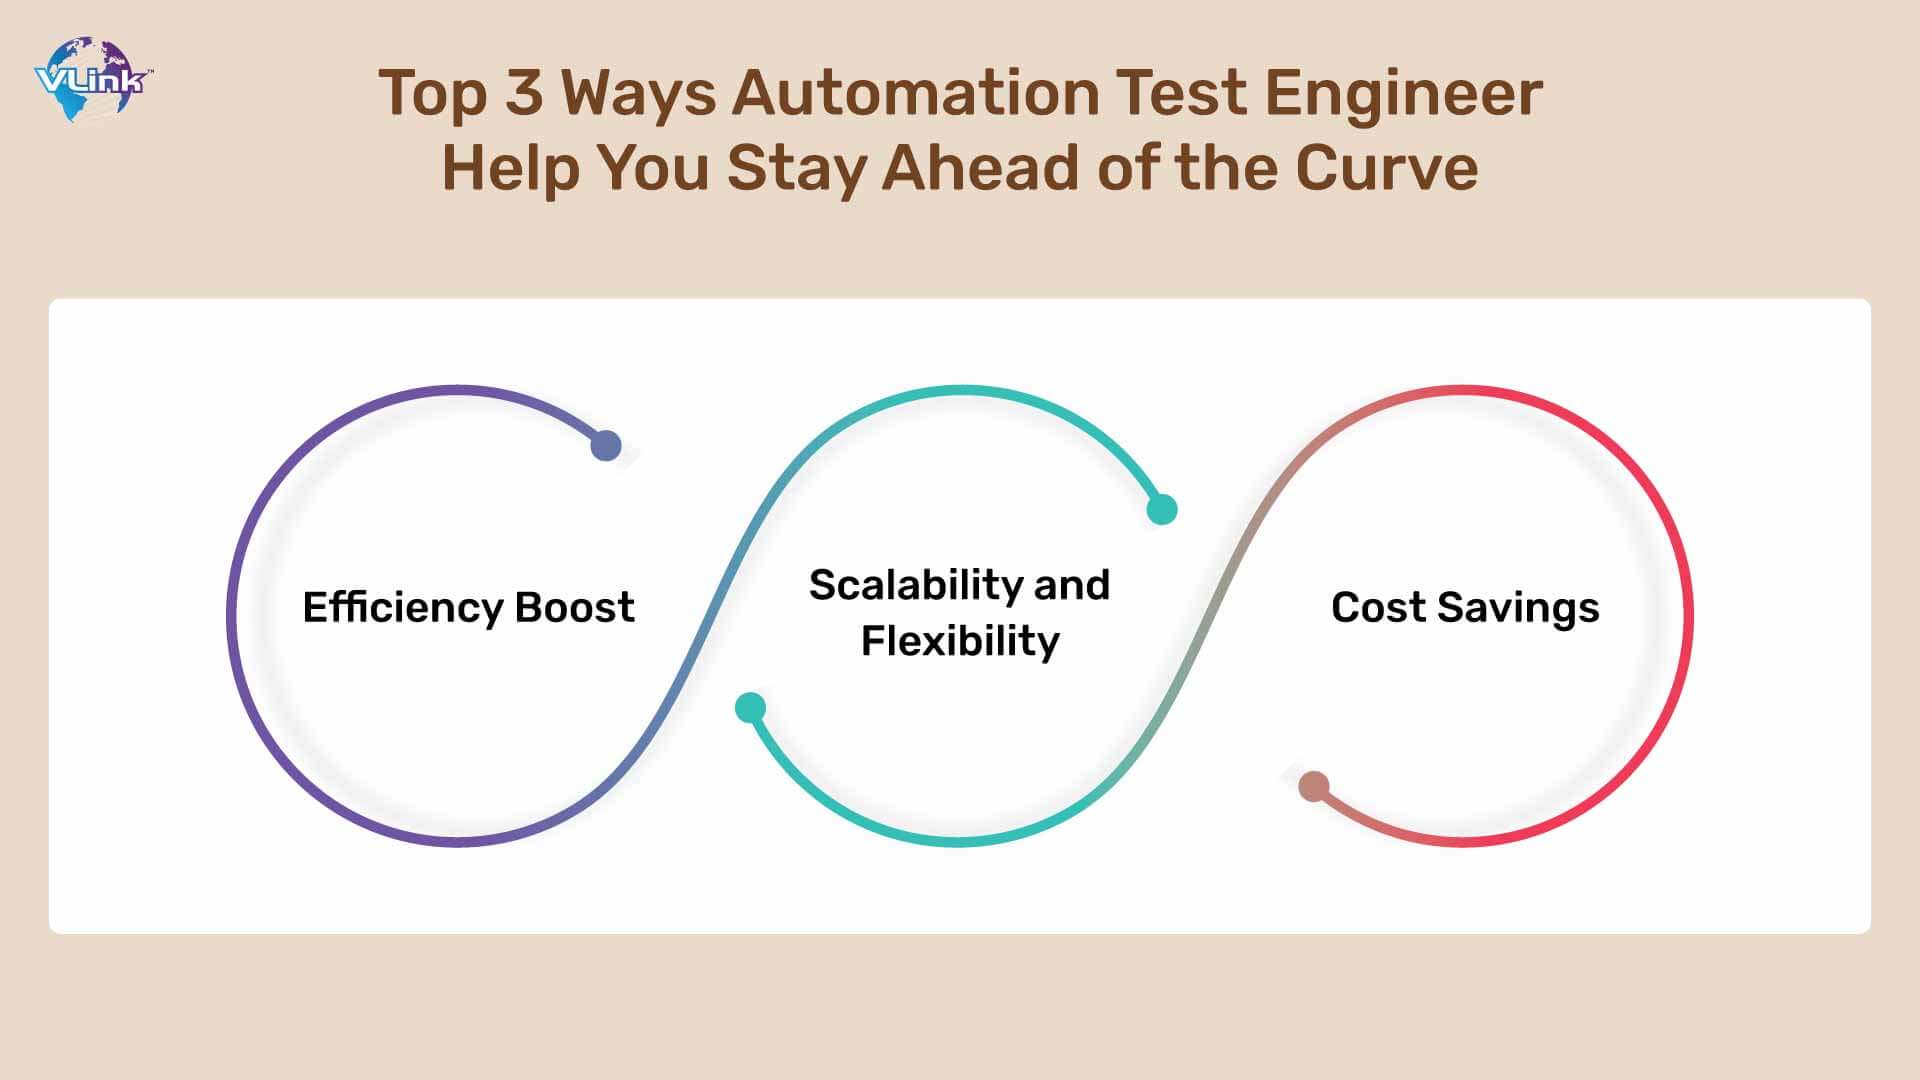 Top 3 Ways Automation Test Engineer Help You Stay Ahead of the Curve